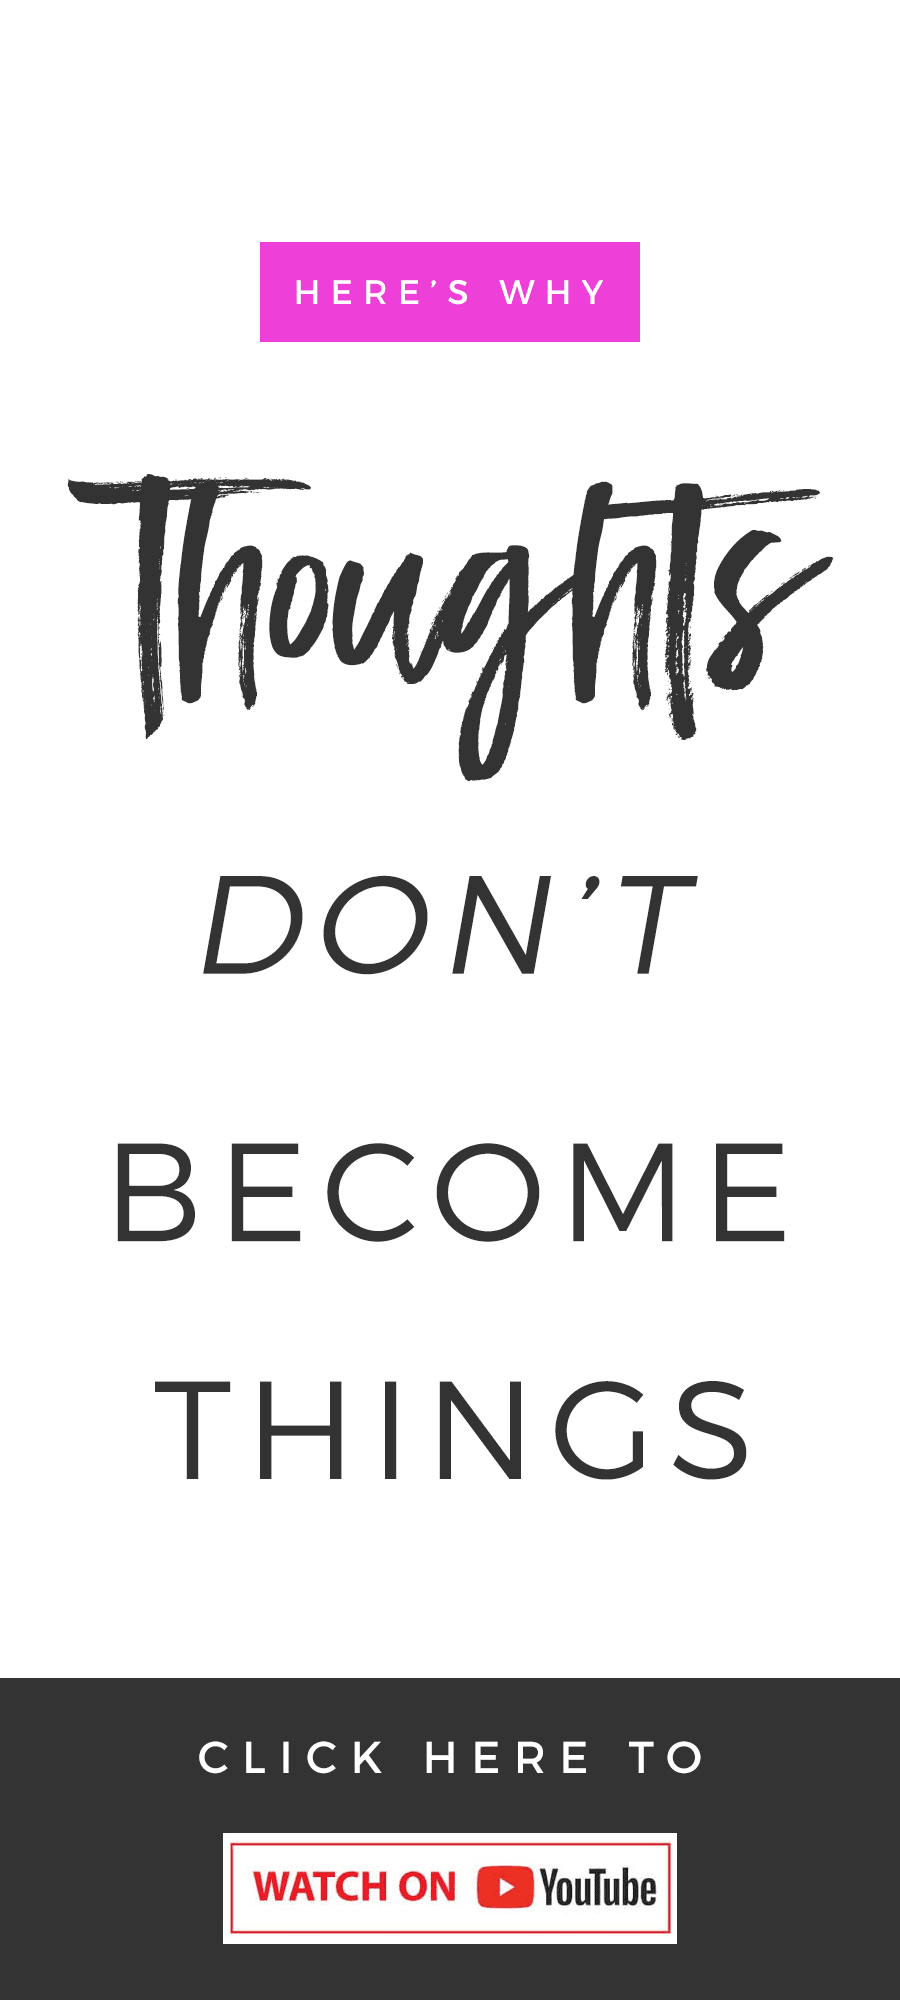 Thoughts Don't Become Things